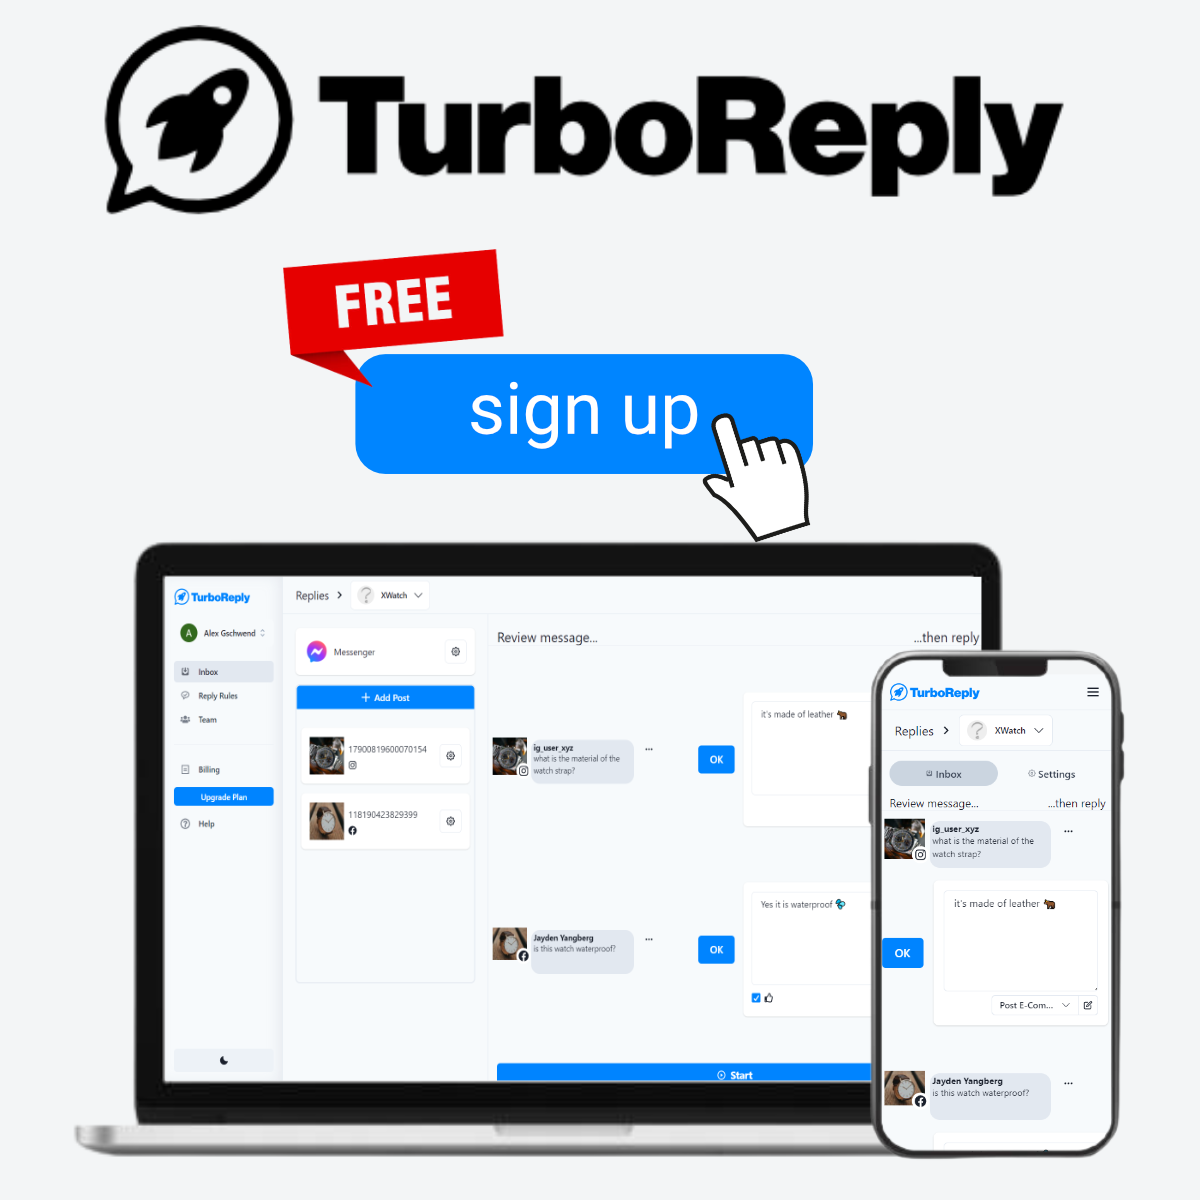 Turboreply free signup